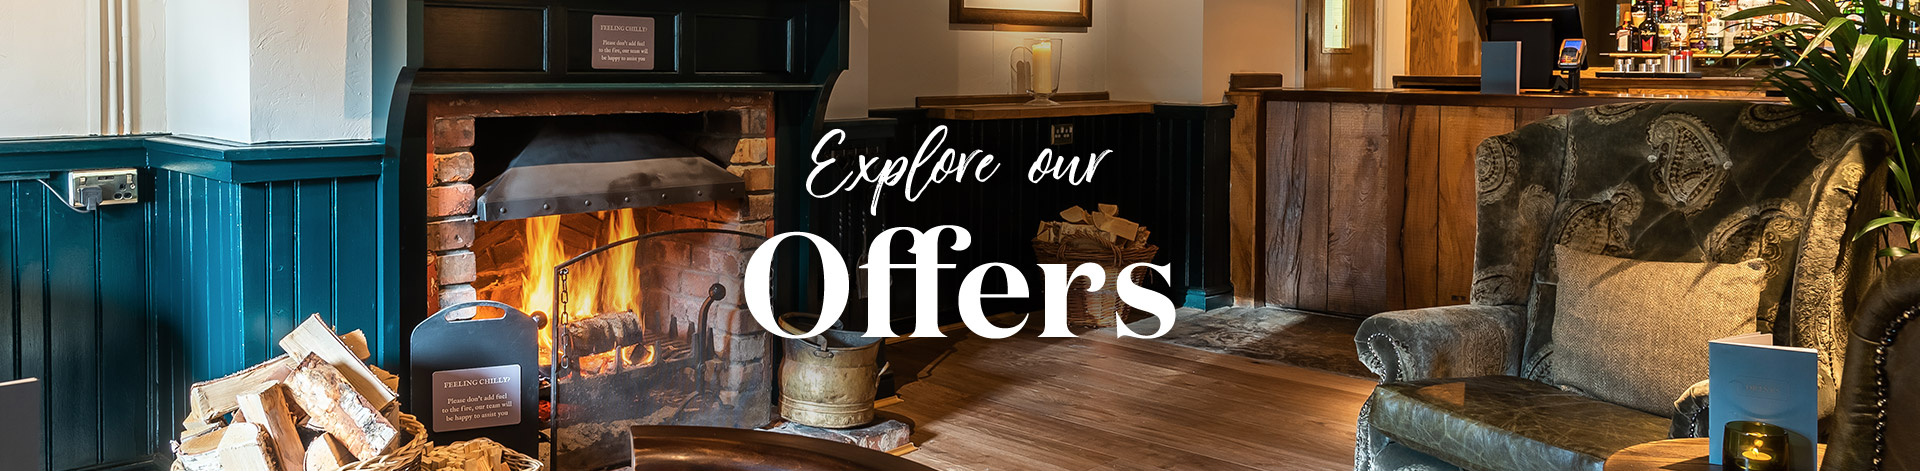 Our latest offers at Ye Olde Cherry Tree